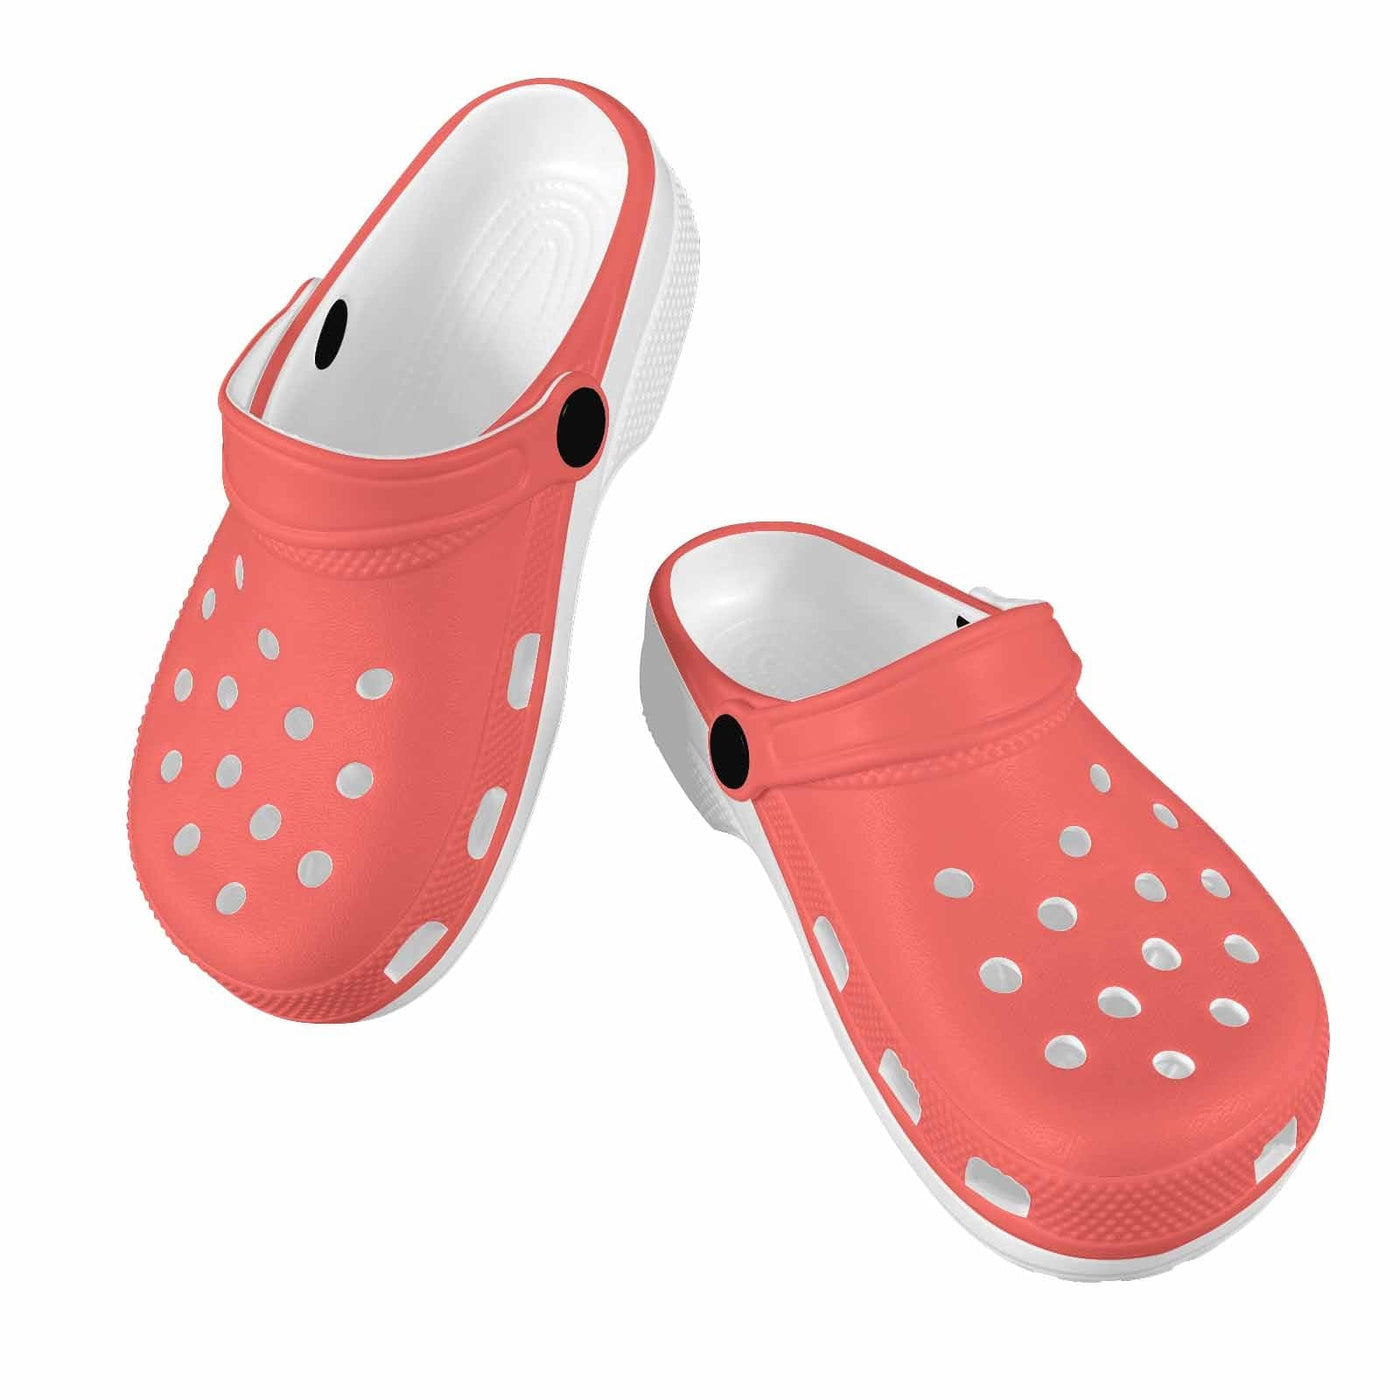 Pastel Red Kids Clogs - Unisex | Clogs | Youth